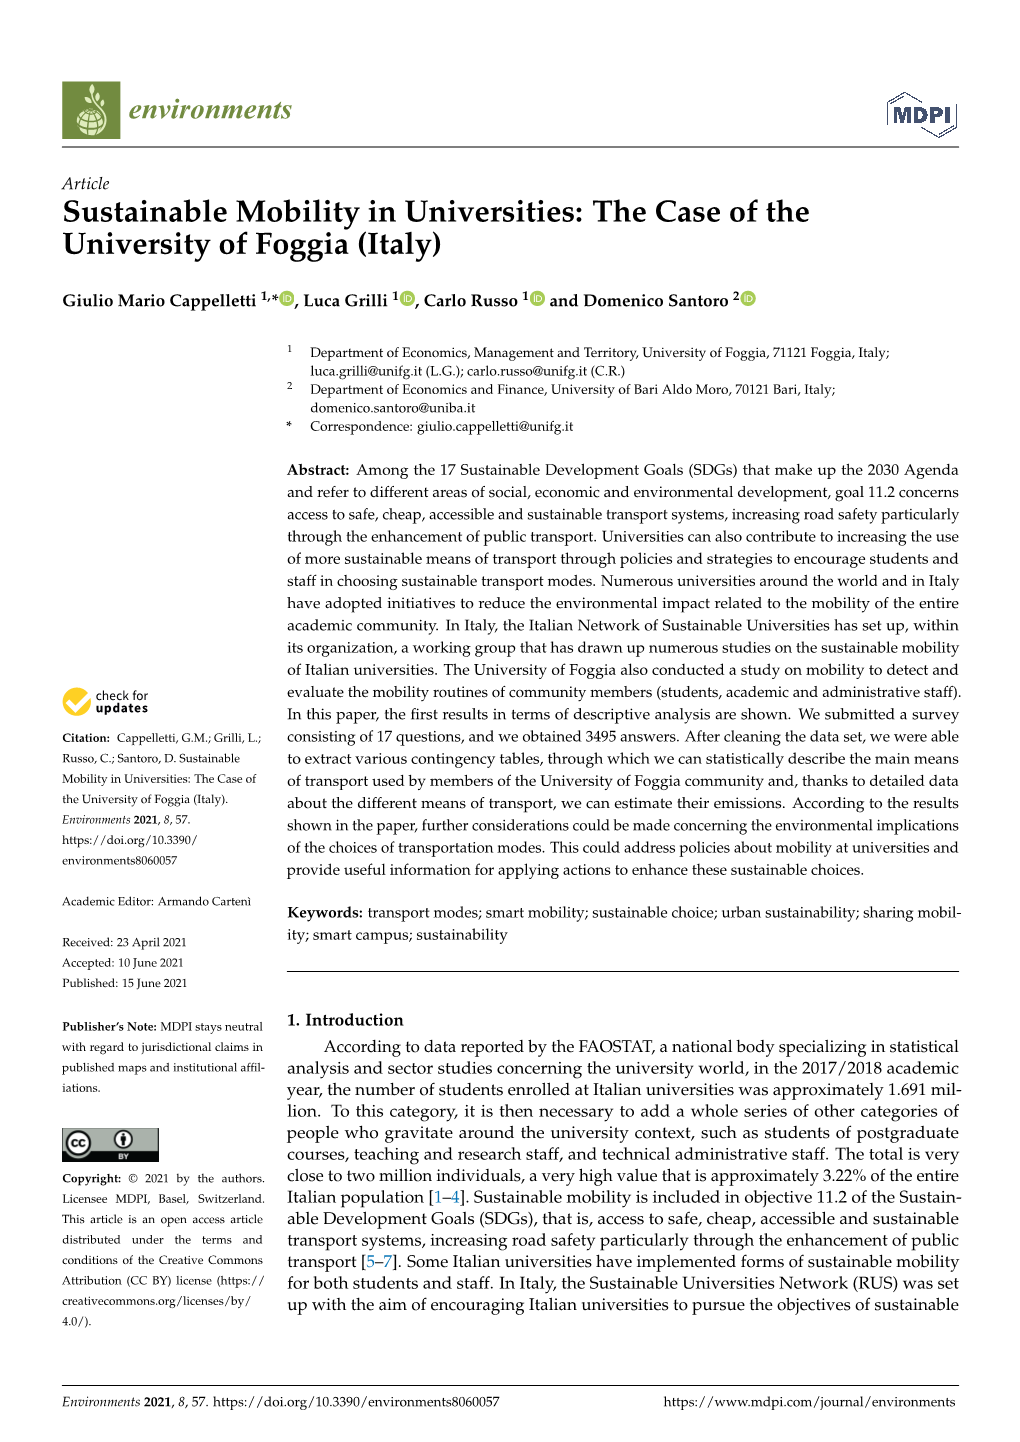 Sustainable Mobility in Universities: the Case of the University of Foggia (Italy)